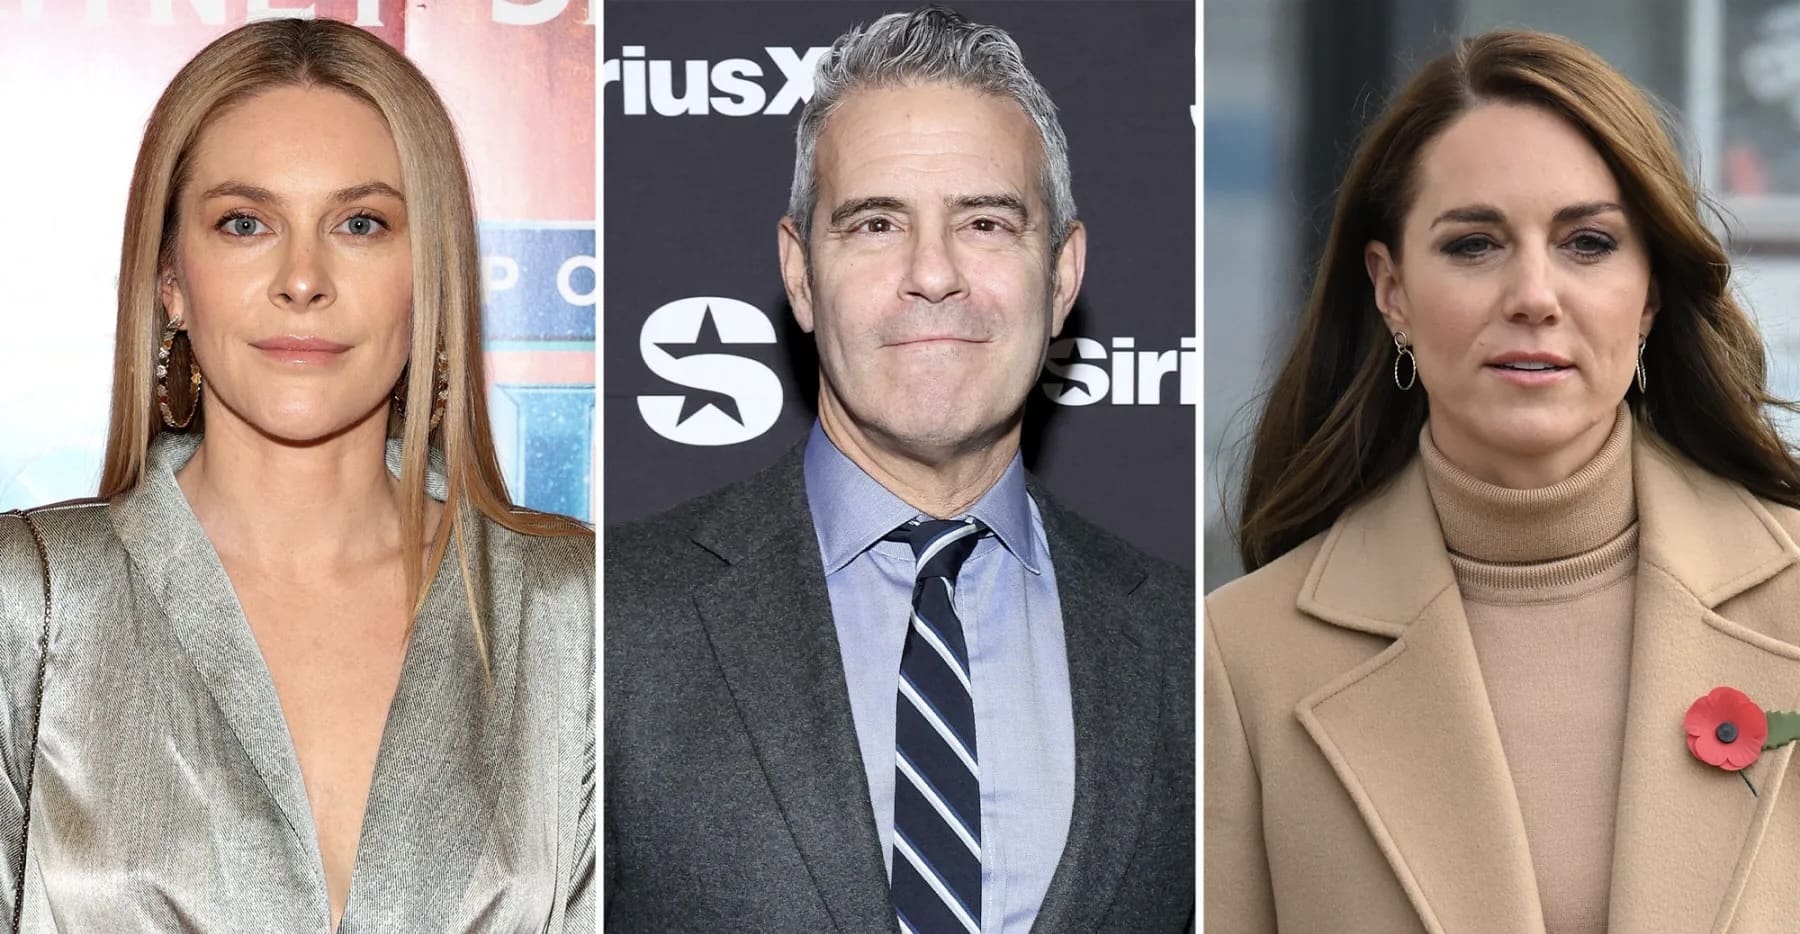 Leah McSweeney Calls Out ‘Cruel’ Andy Cohen Amid Their Lawsuit for Trolling Kate Middleton Prior to Cancer Reveal: ‘Apologize to Her’